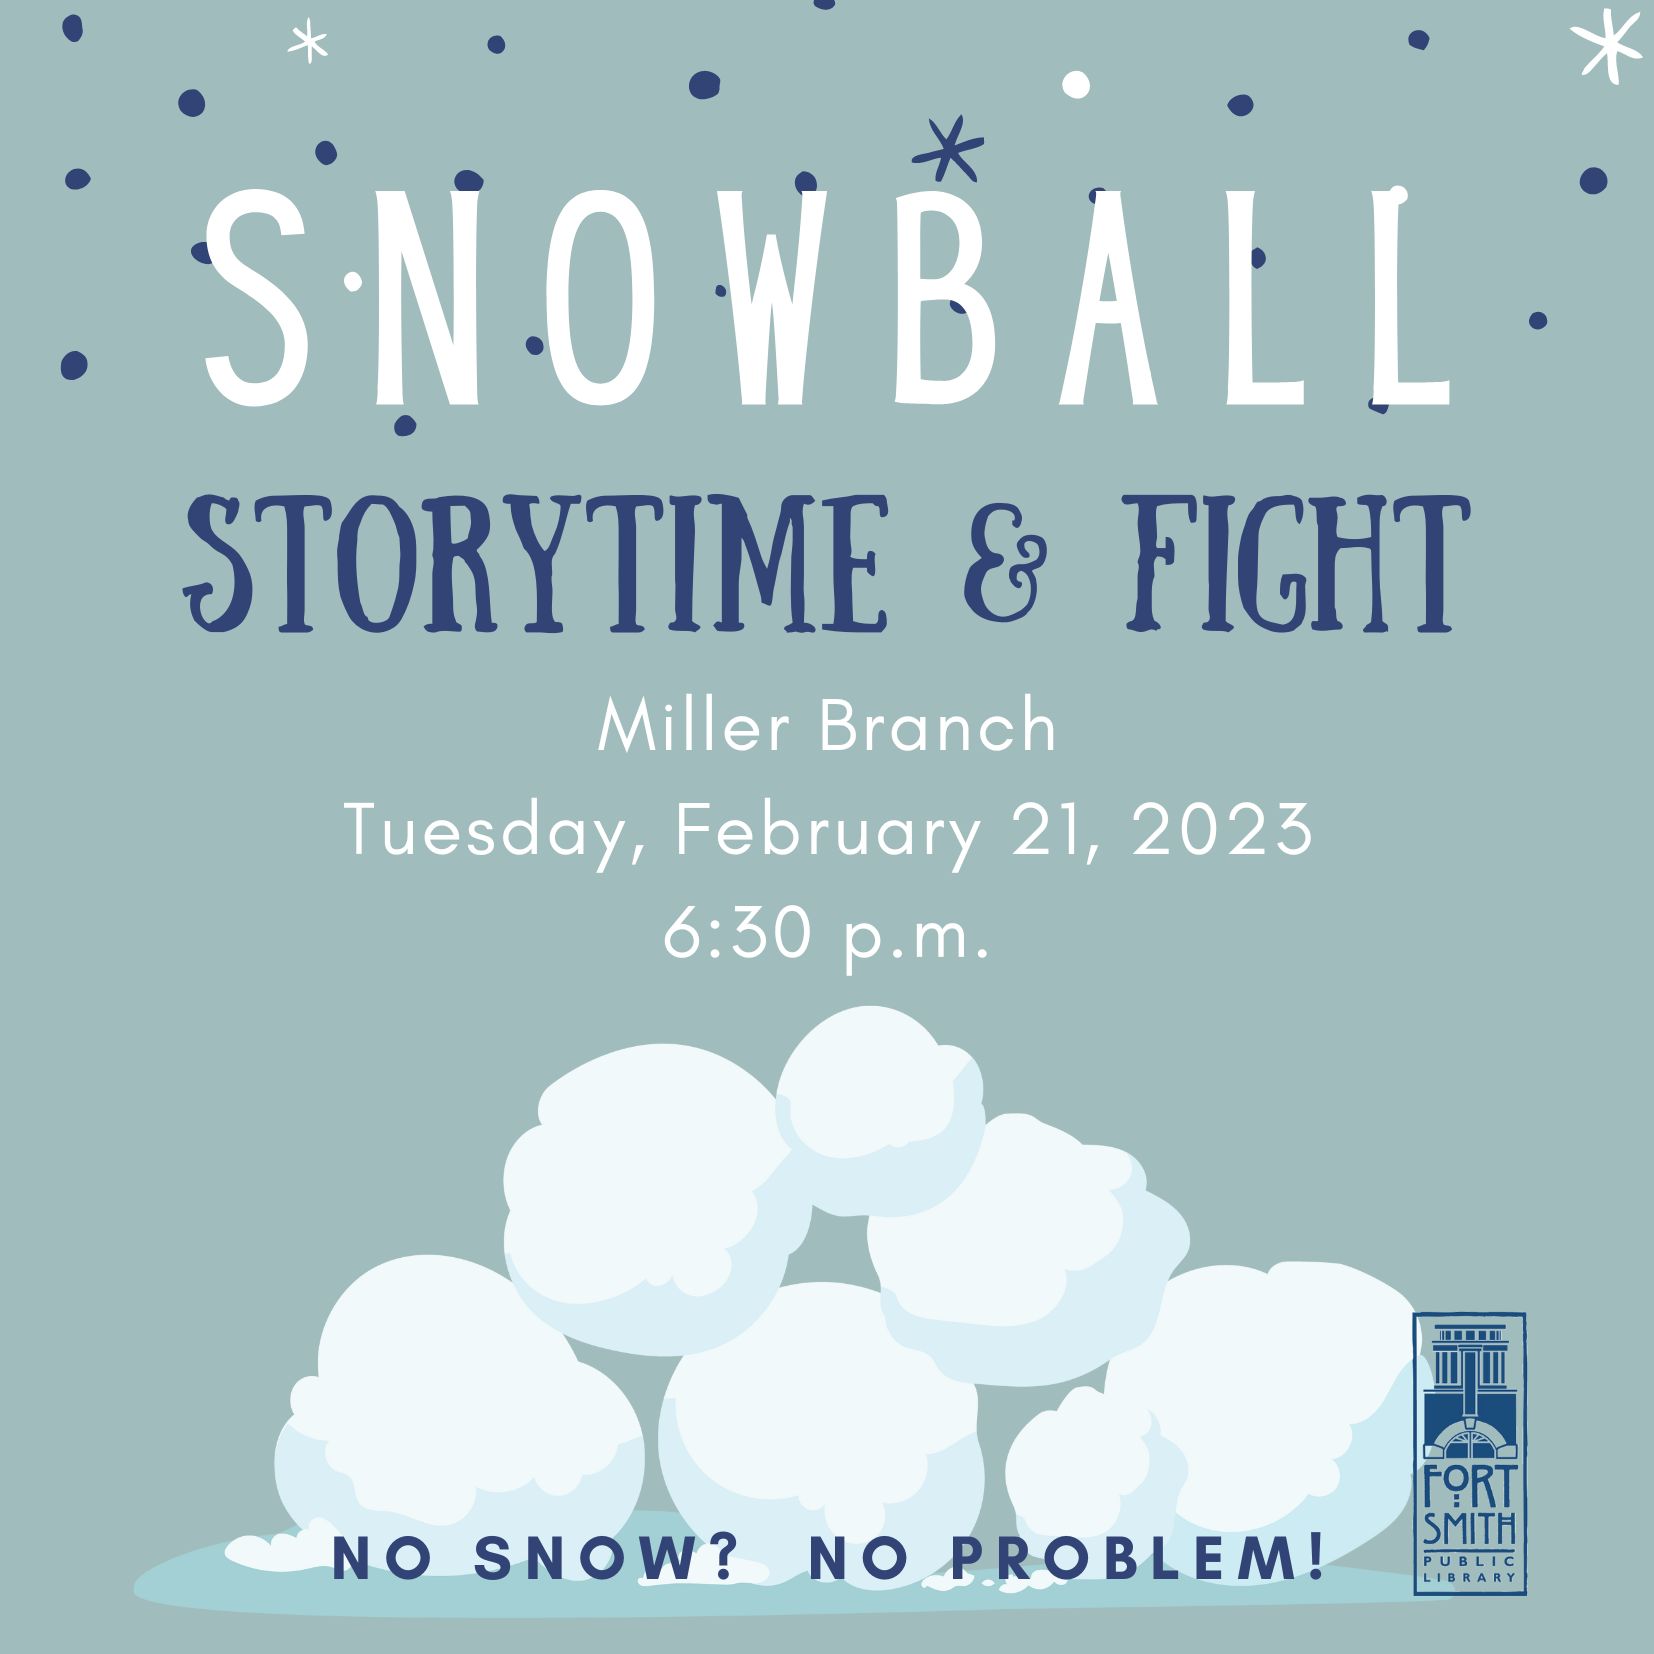 Snowball storytime and fight image